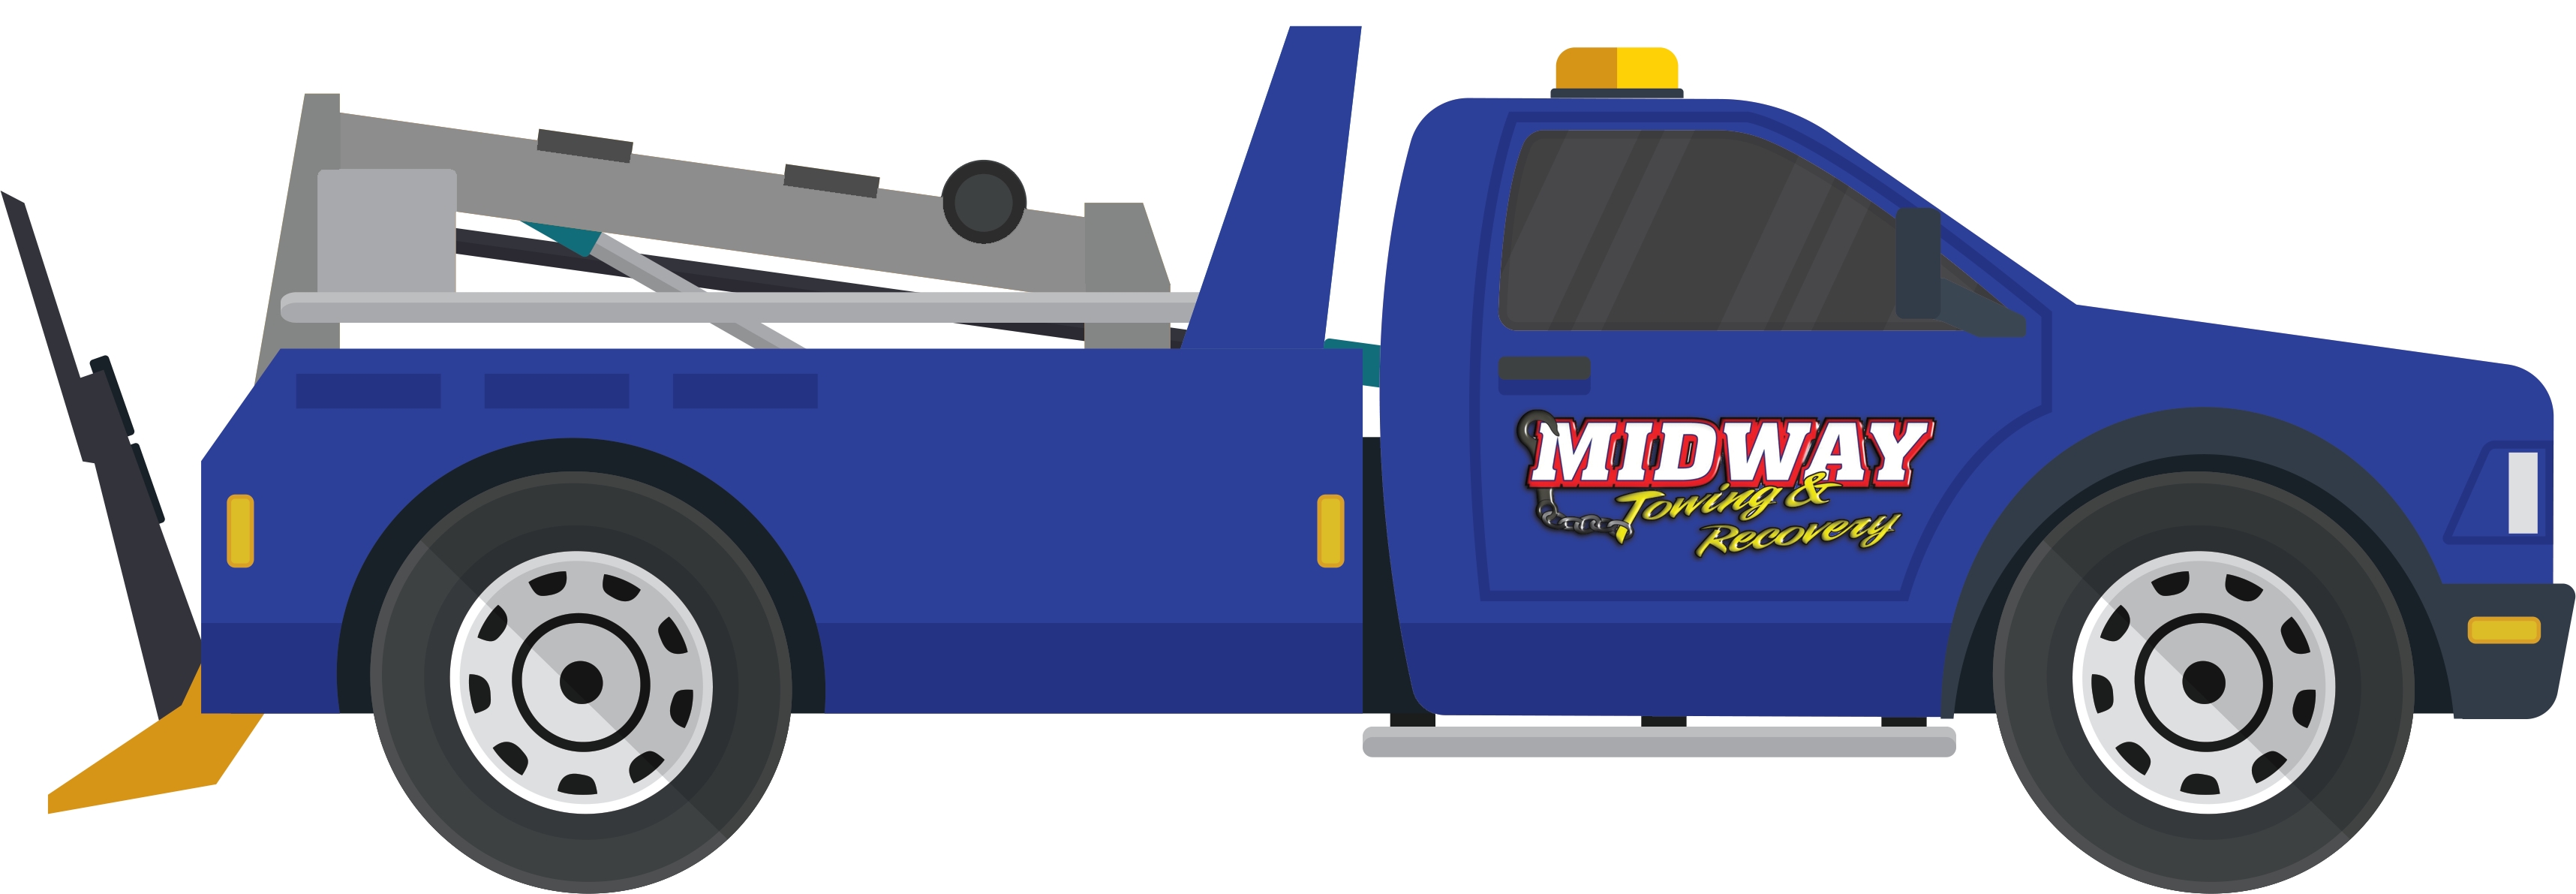 Contact Midway Towing & Recovery in Richmond, Virginia